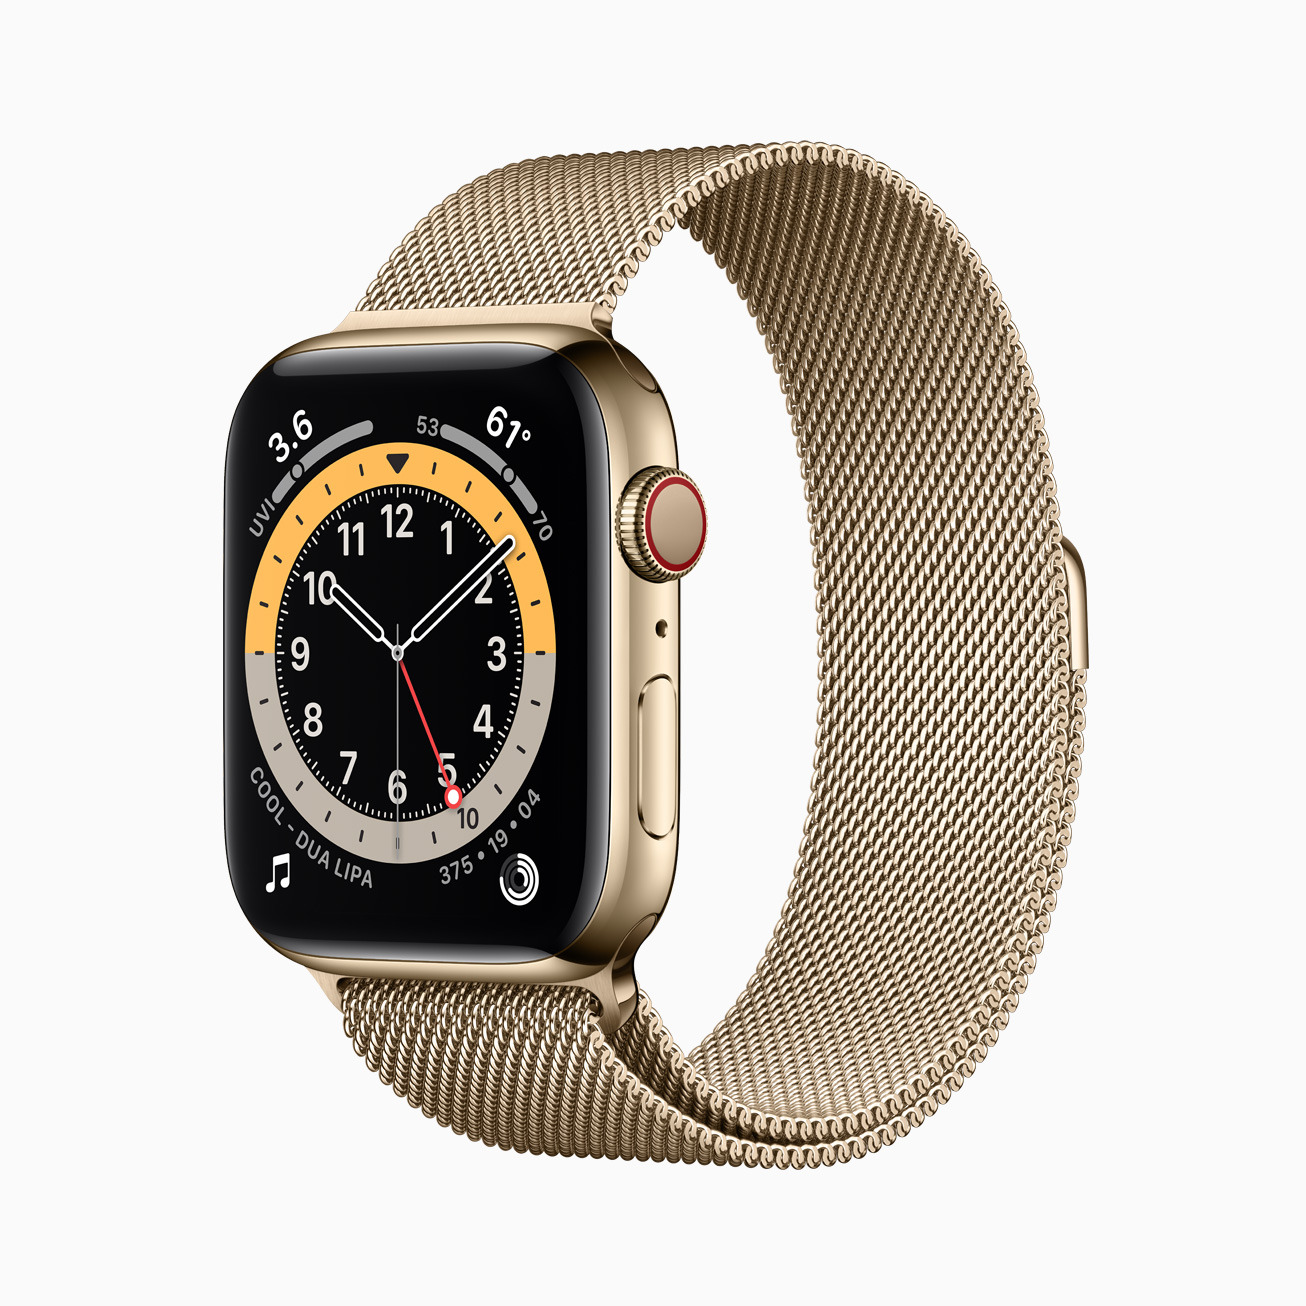 The Apple Watch Series 6 in a Stainless Steel gold-colored case. 